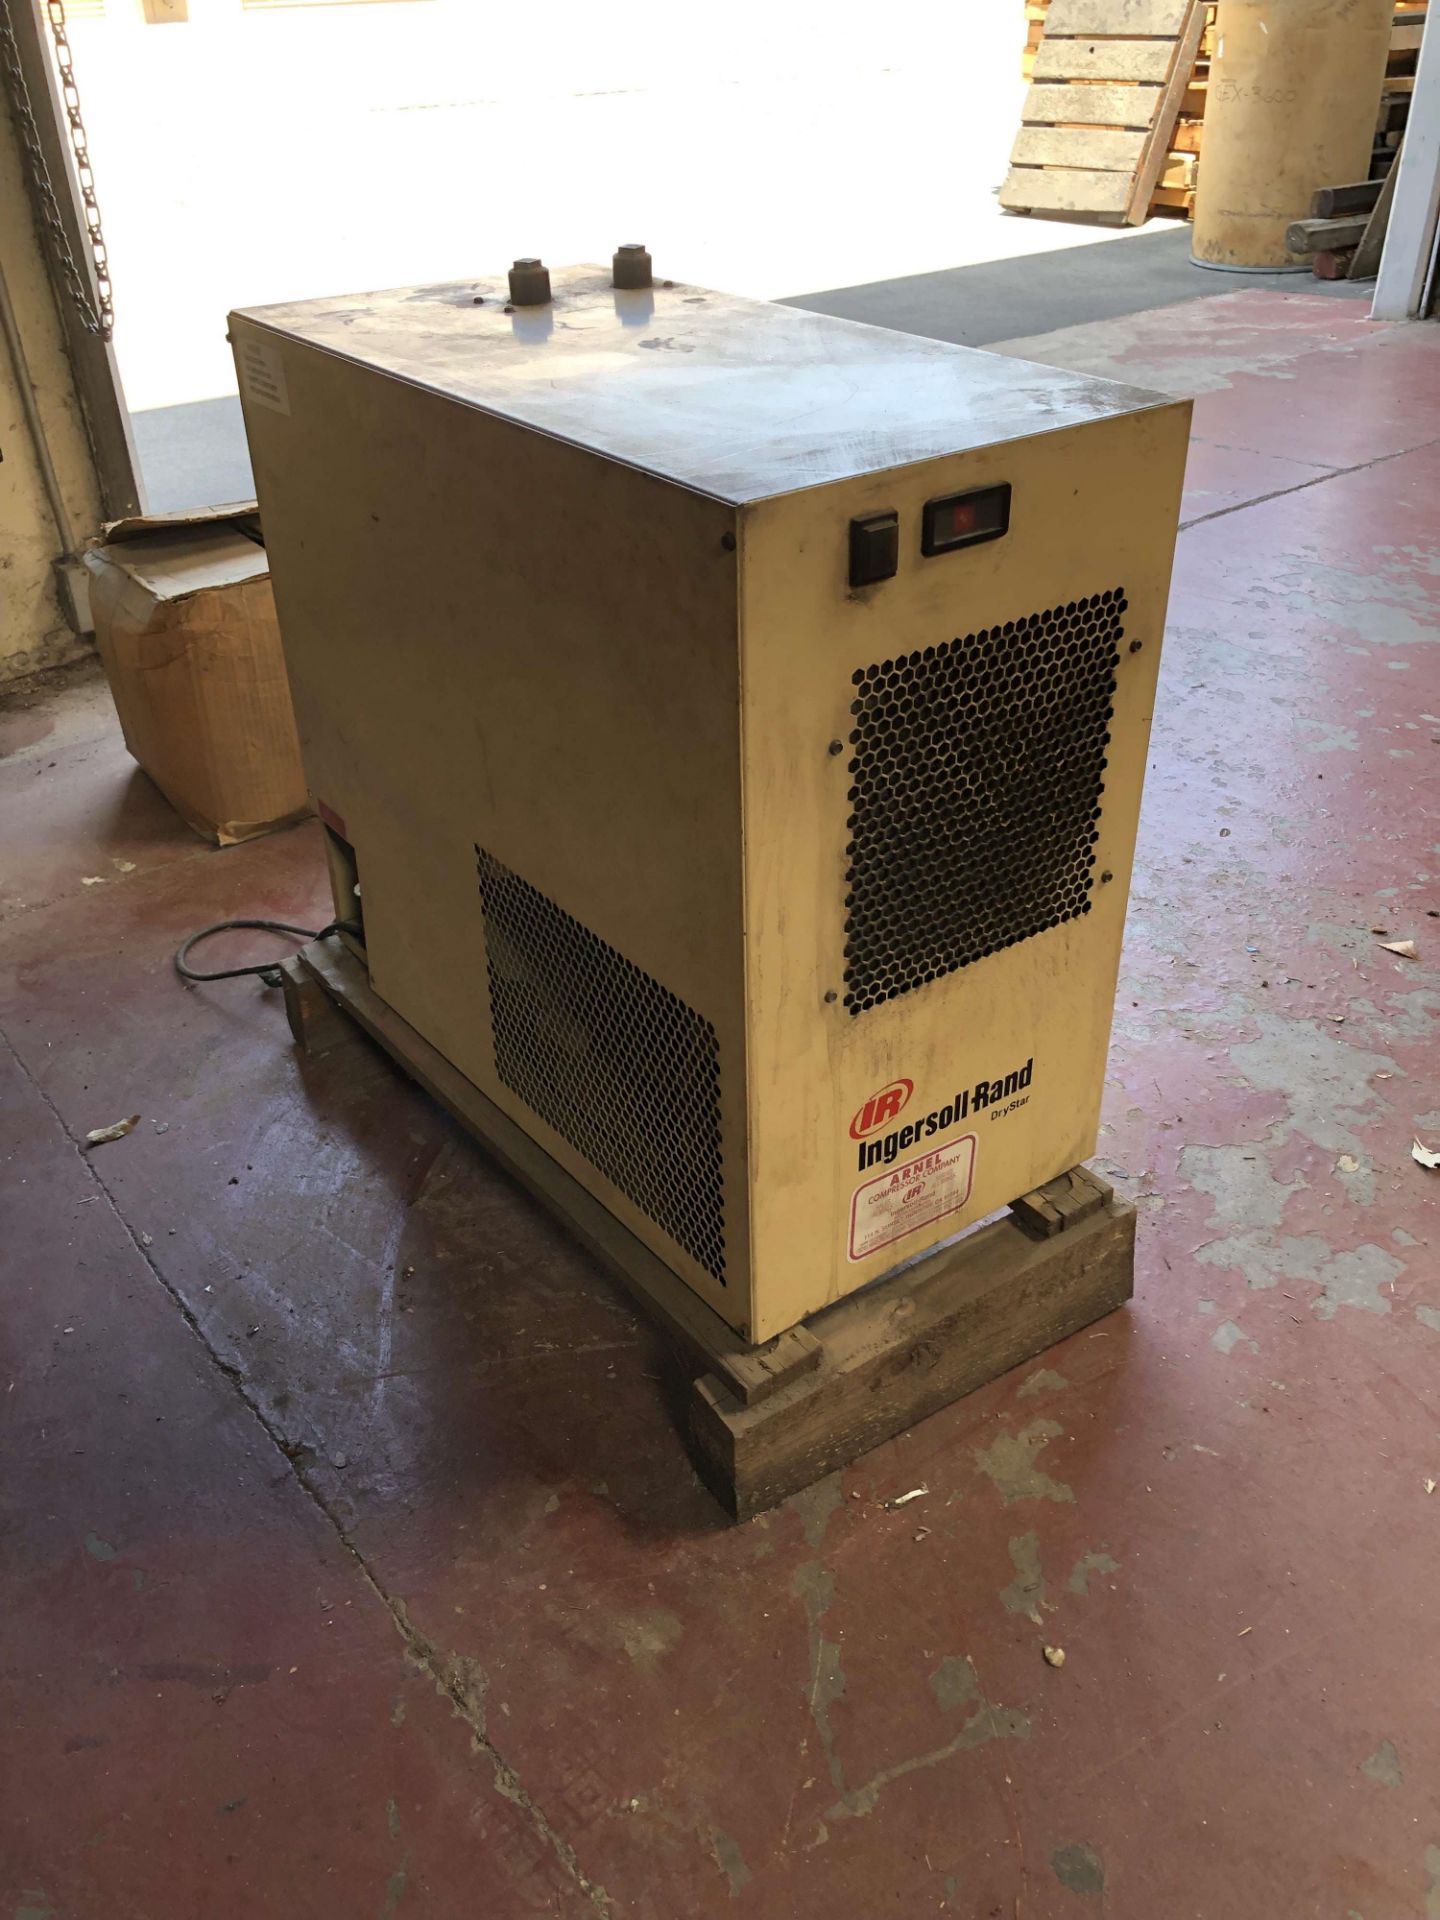 Ingersoll Rand DryStar Refrigerated Air Dryer, Model DS75, S/N 2361060006 - Image 2 of 3